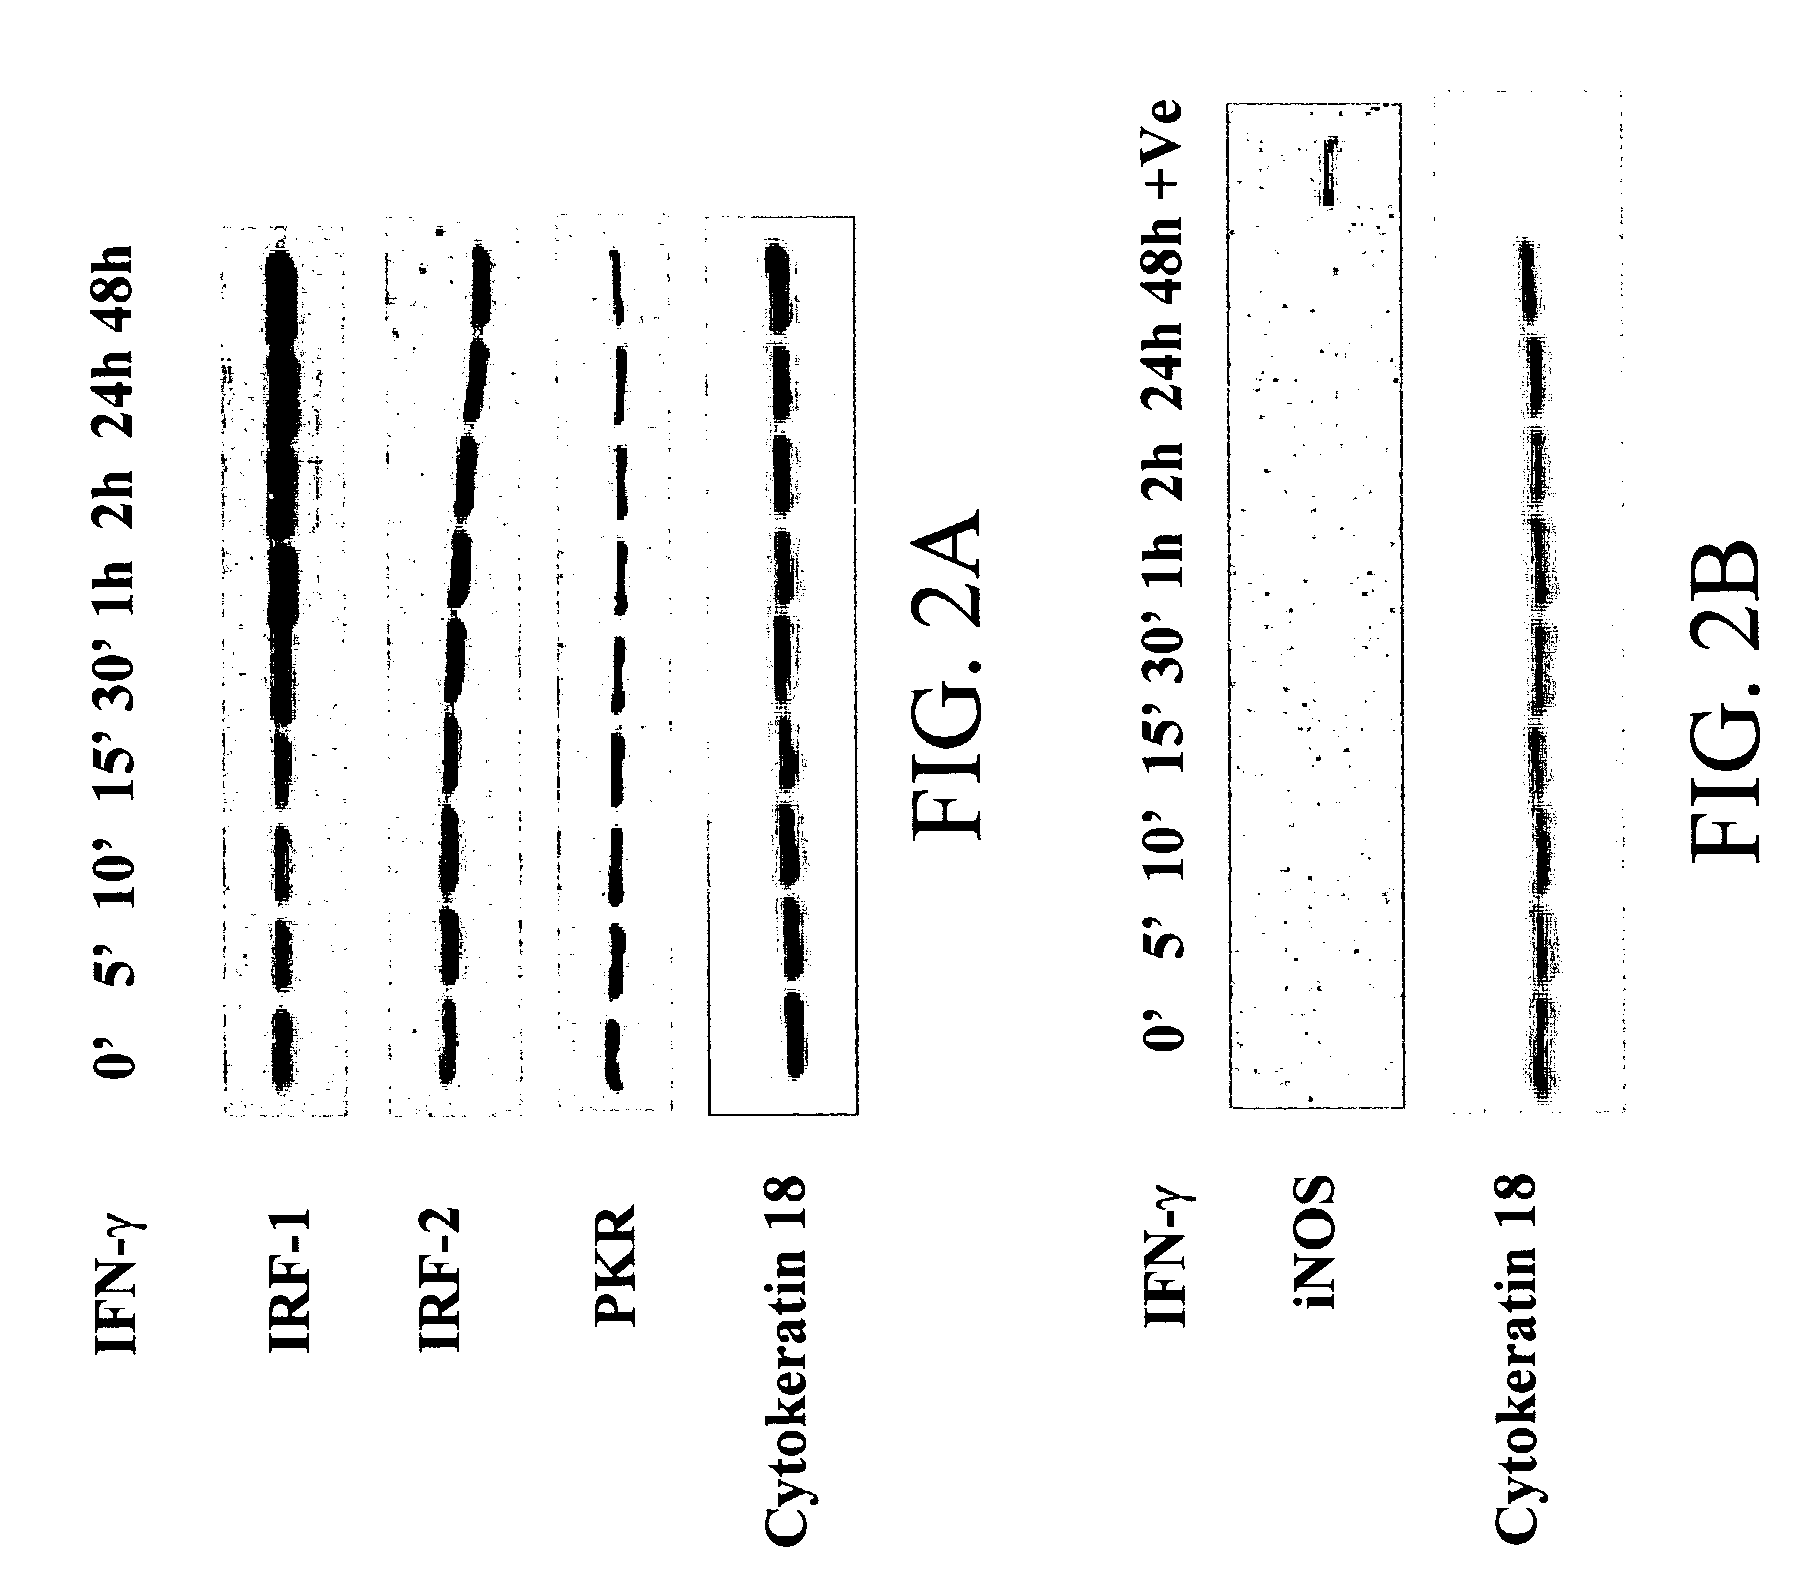 Materials and methods for prevention and treatment of RNA viral diseases